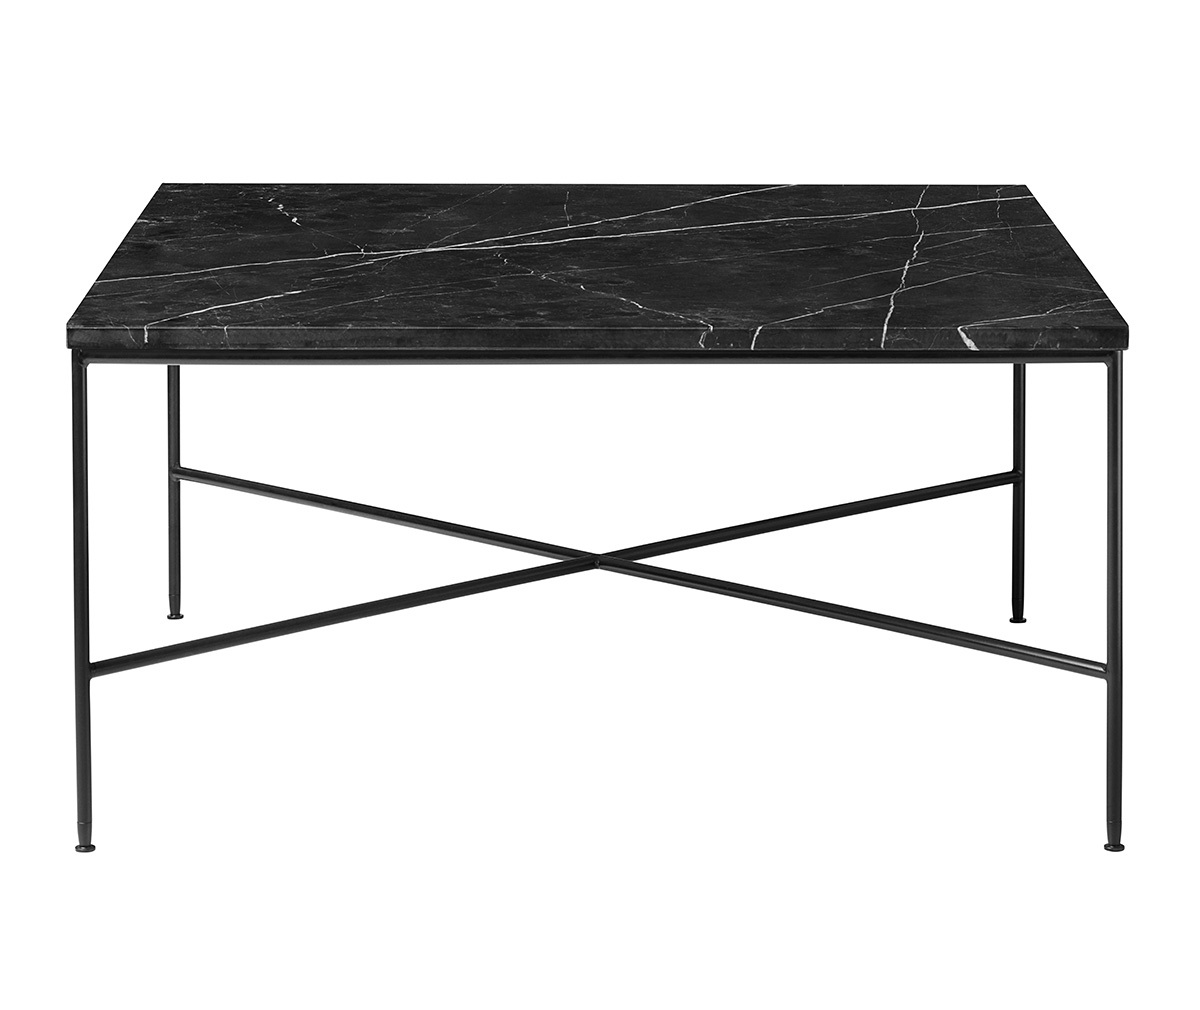 Fritz Hansen Planner Coffee Table Charcoal Marble, 80 x 80 cm